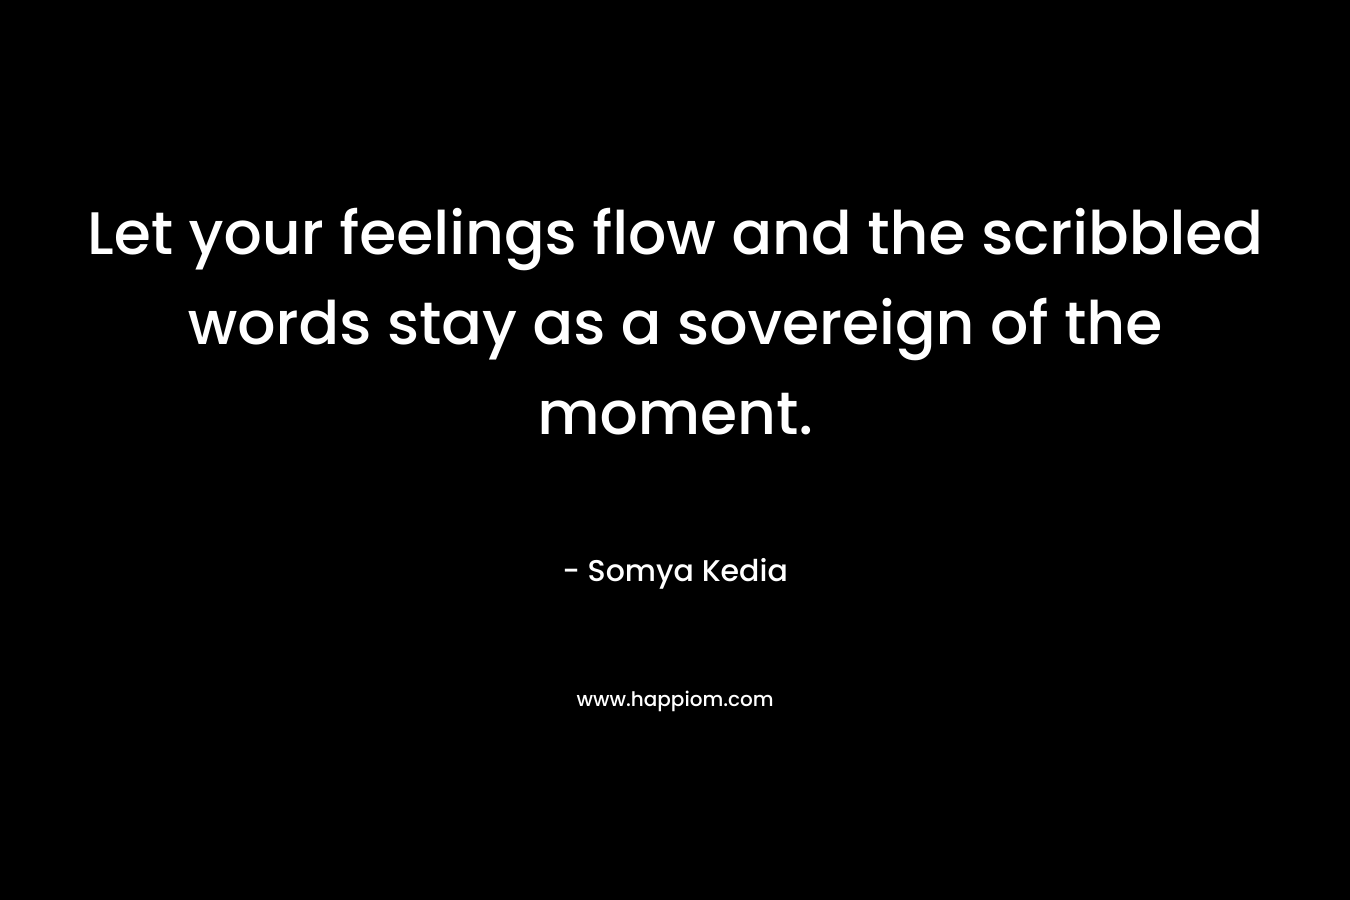 Let your feelings flow and the scribbled words stay as a sovereign of the moment. – Somya Kedia